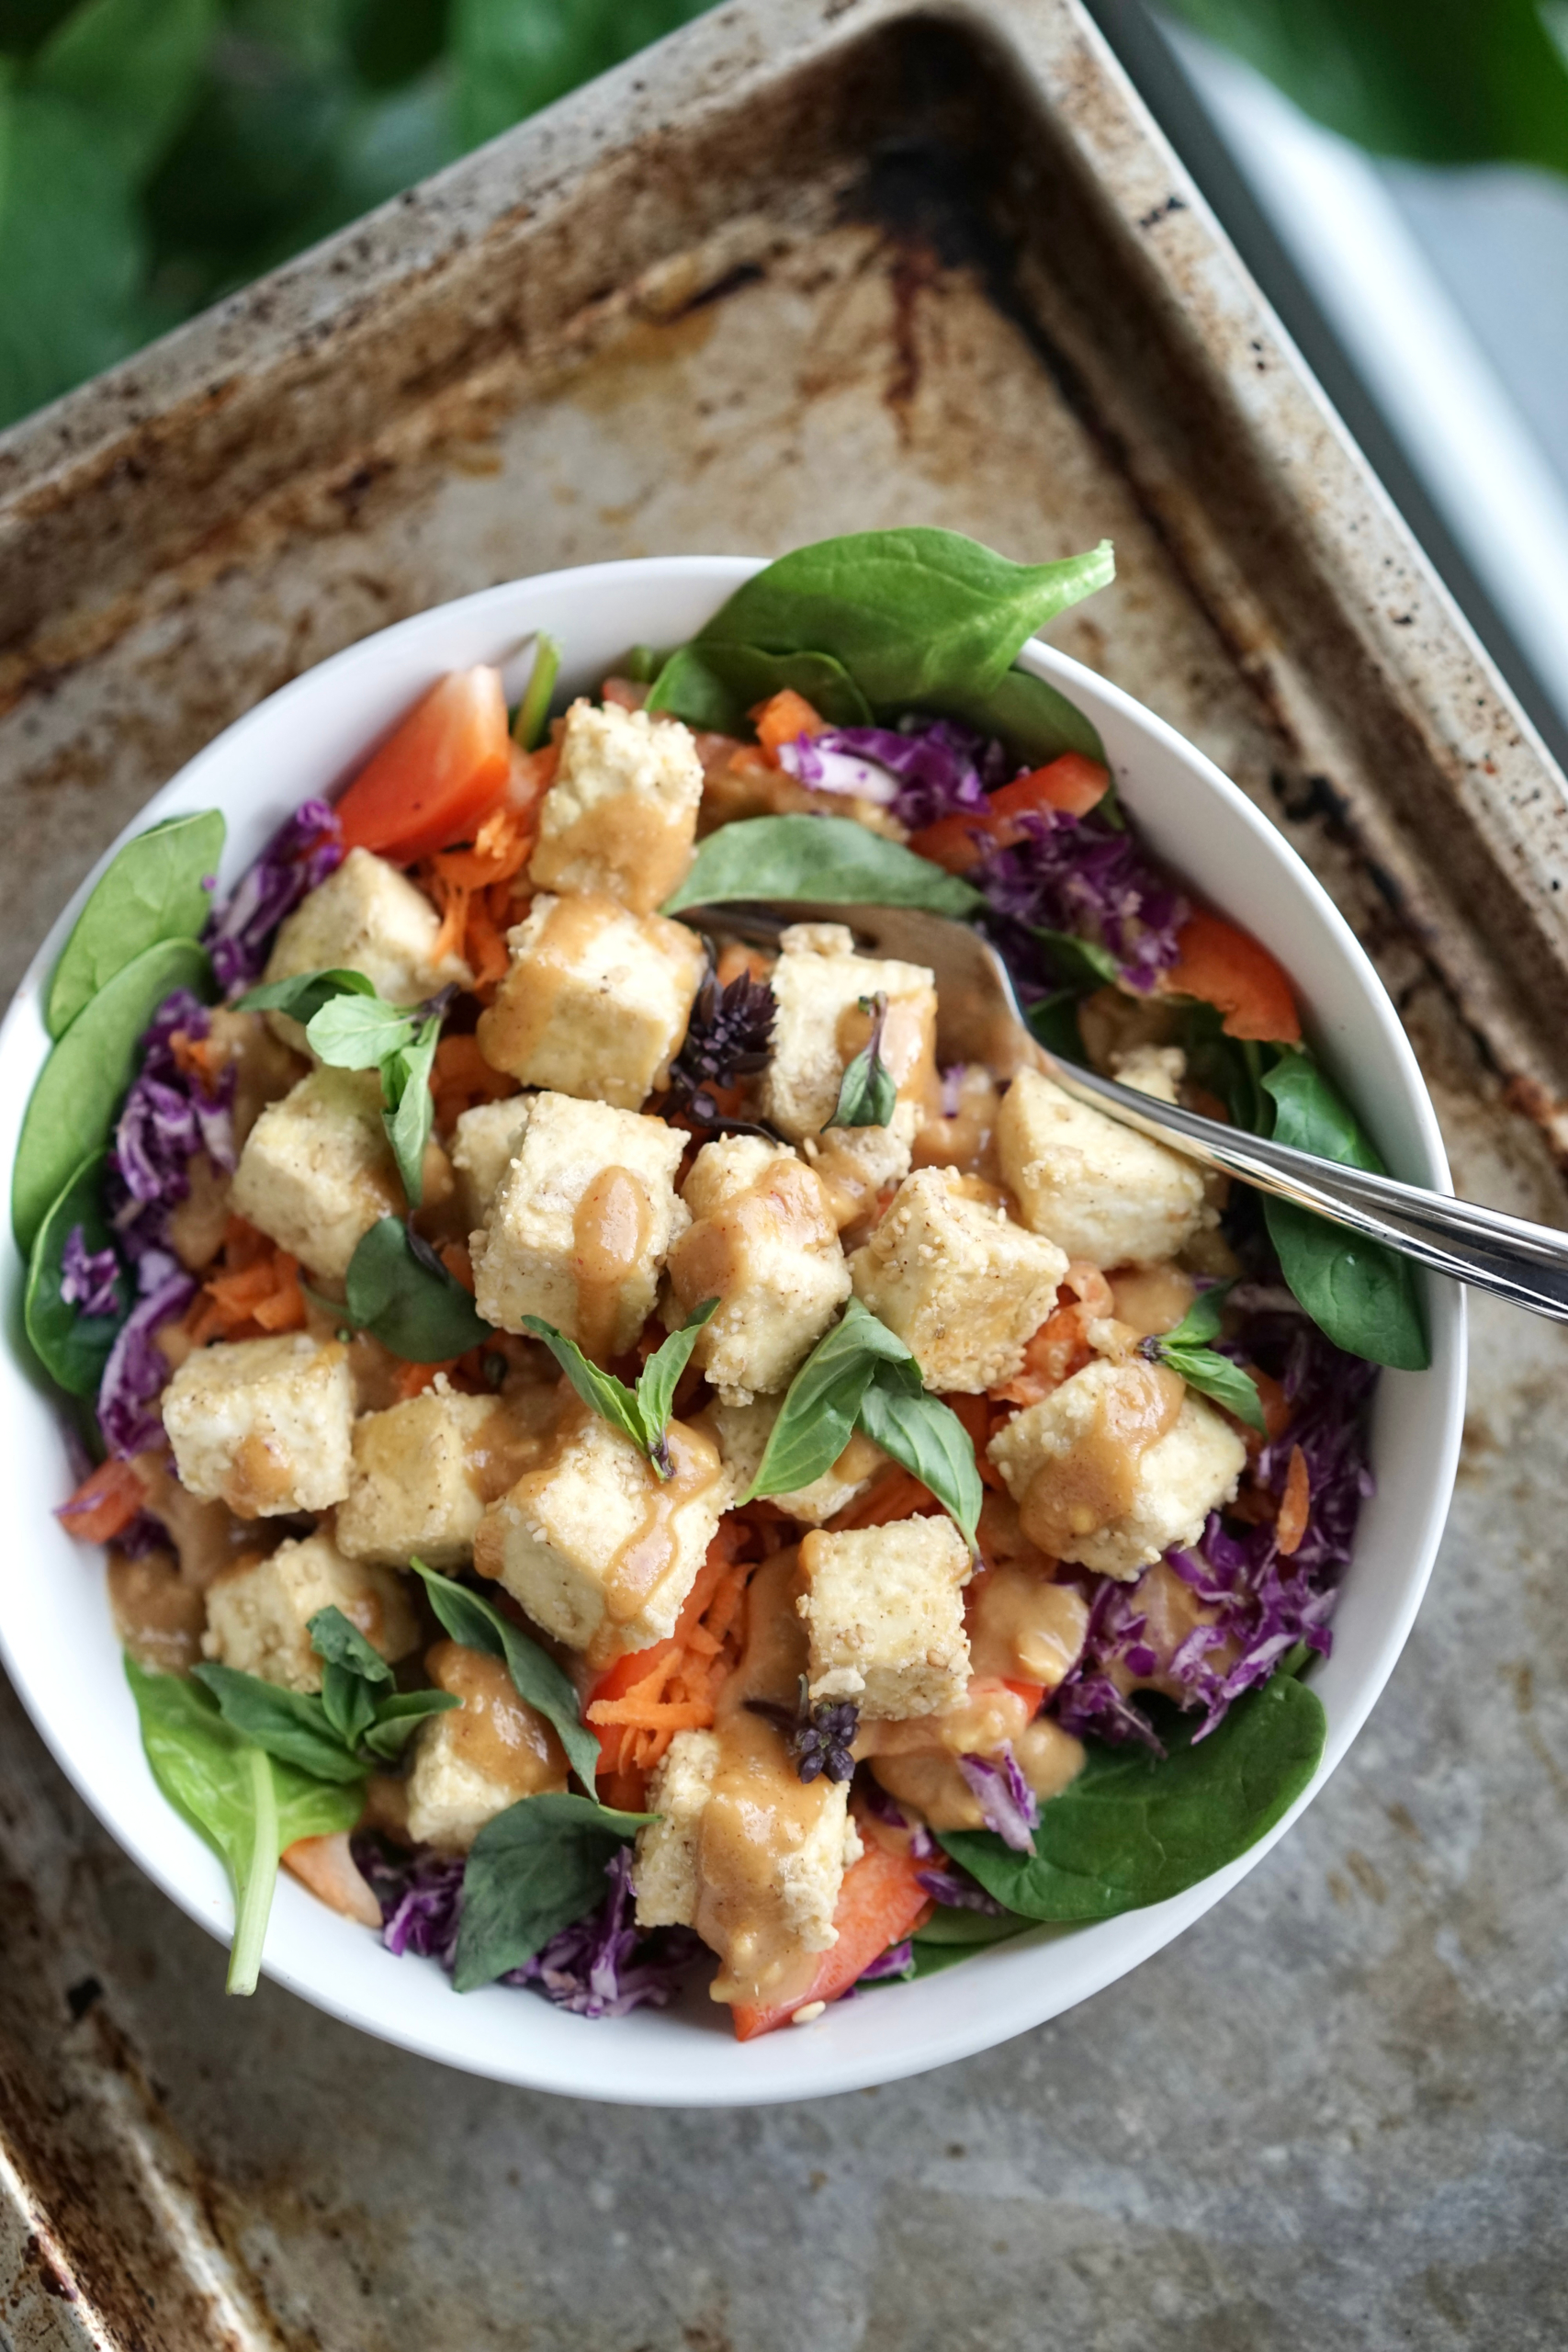 Crispy Baked Tofu & Raw Veggies with Peanut Miso Sauce | Living Healthy in Seattle